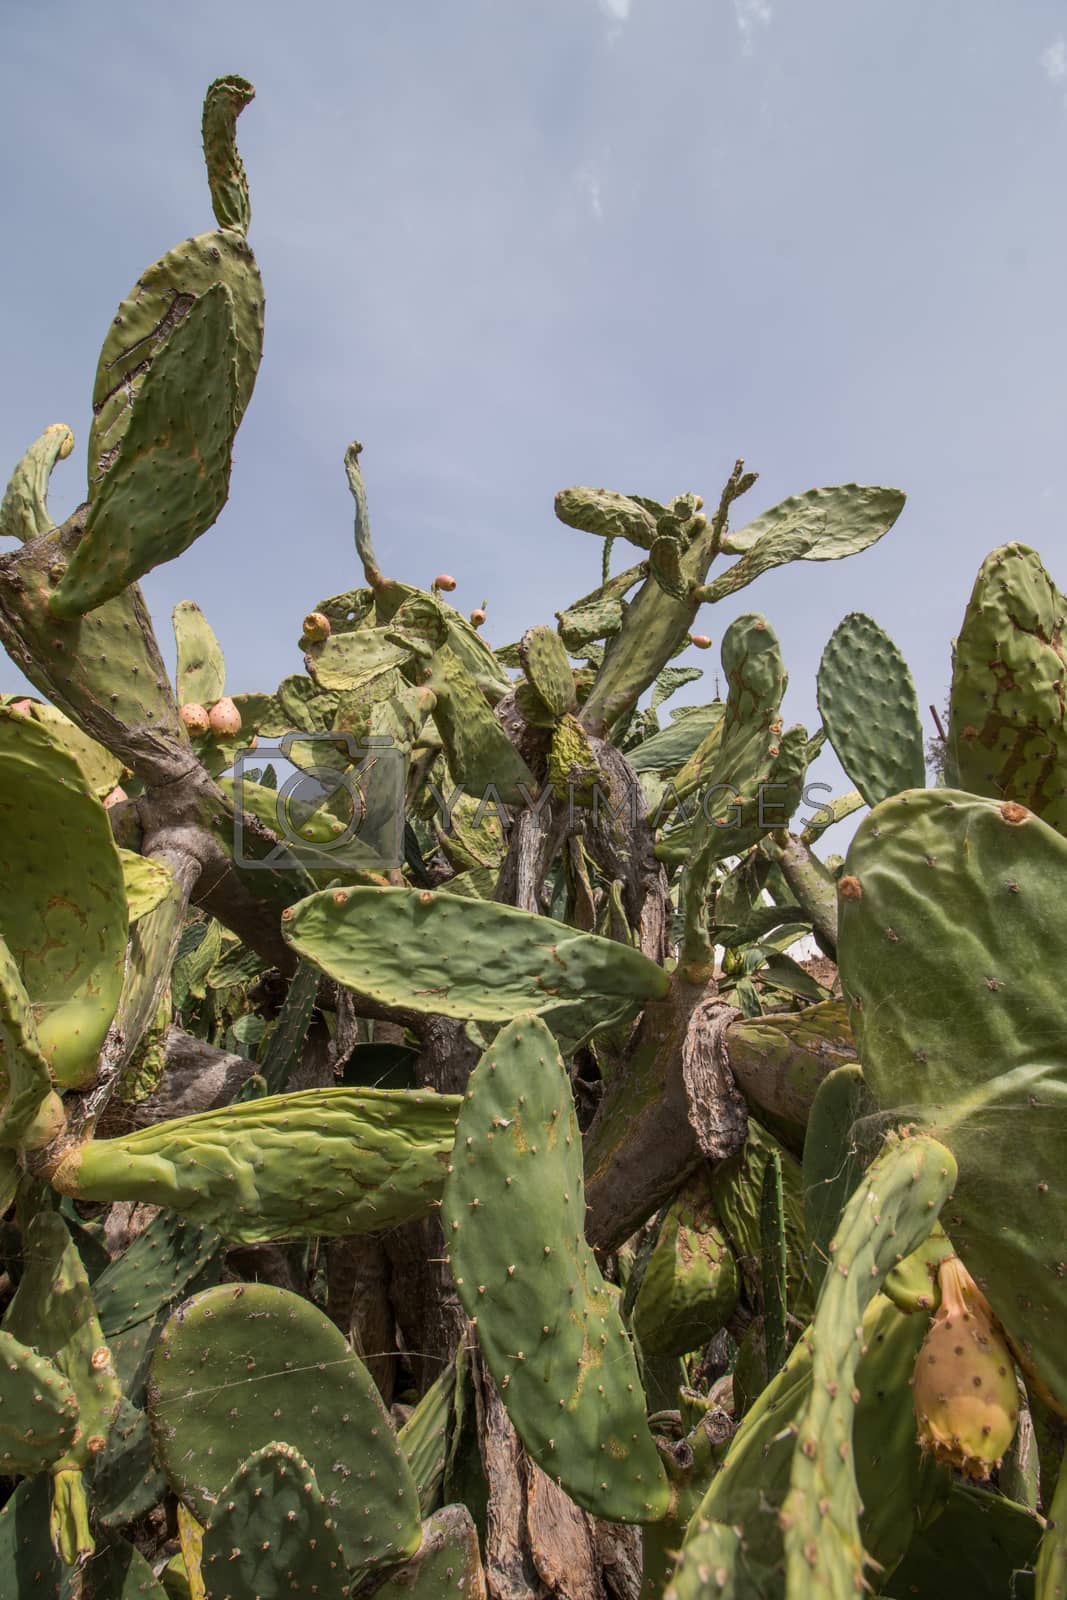 Royalty free image of  Prickly pears (Opuntia ficus-indica) or indian figs by membio